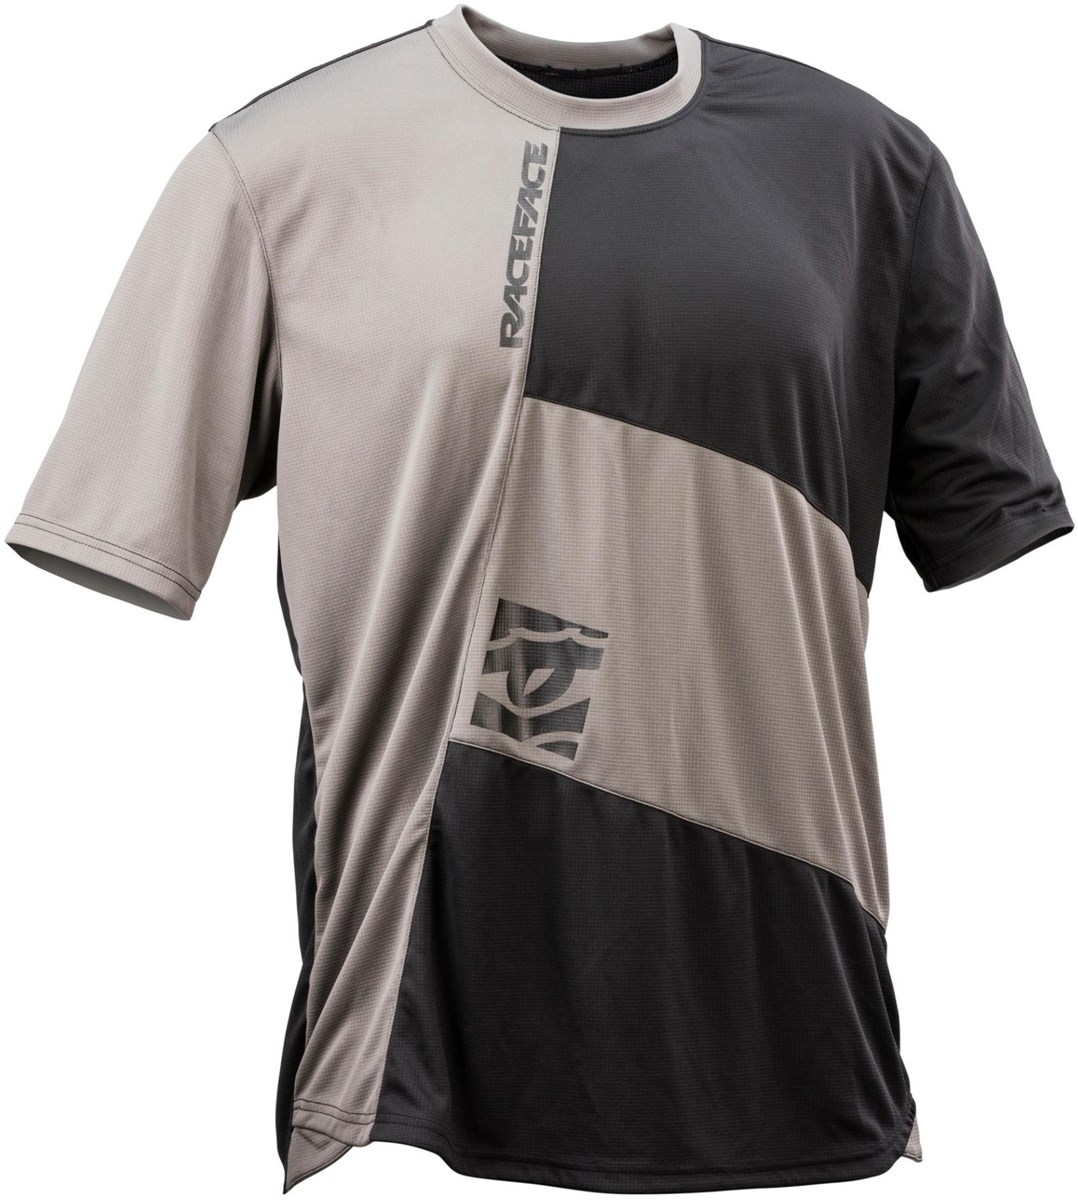 Race Face Indy Short Sleeve Jersey product image